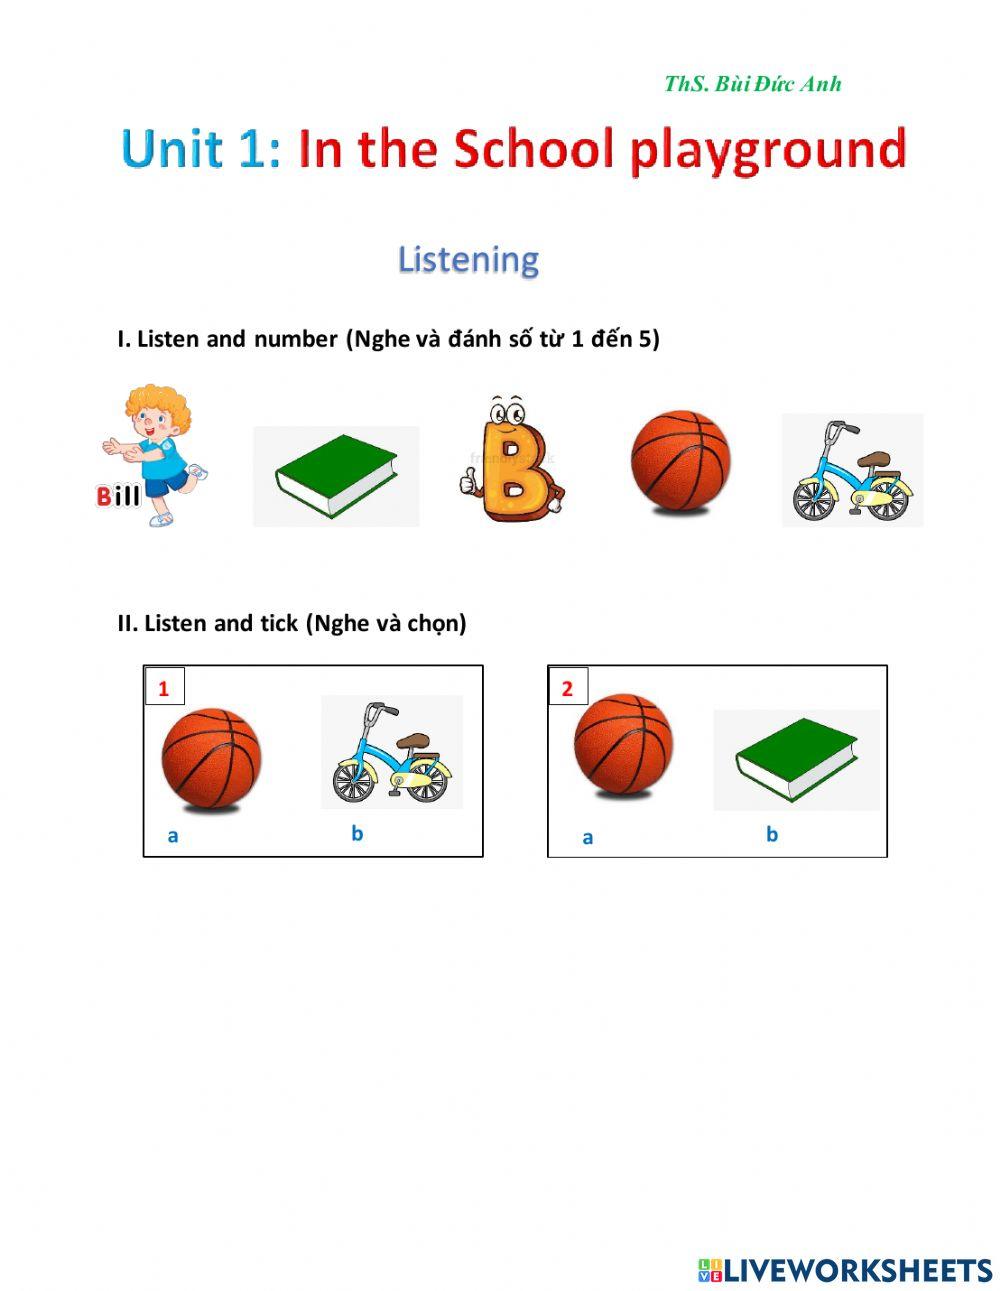 Unit 1: In the school playground